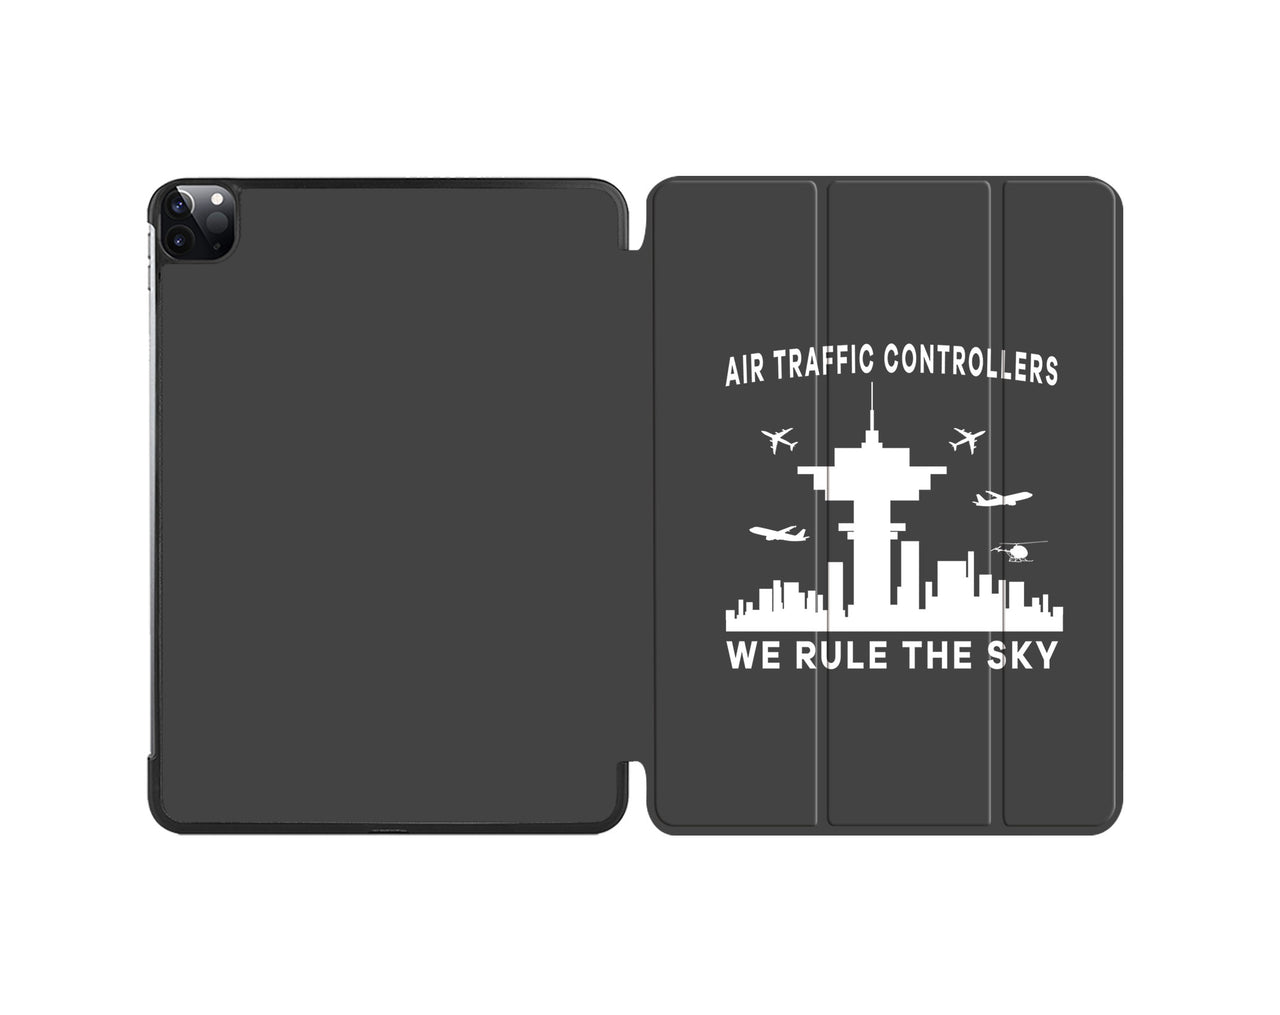 Air Traffic Controllers - We Rule The Sky Designed iPad Cases